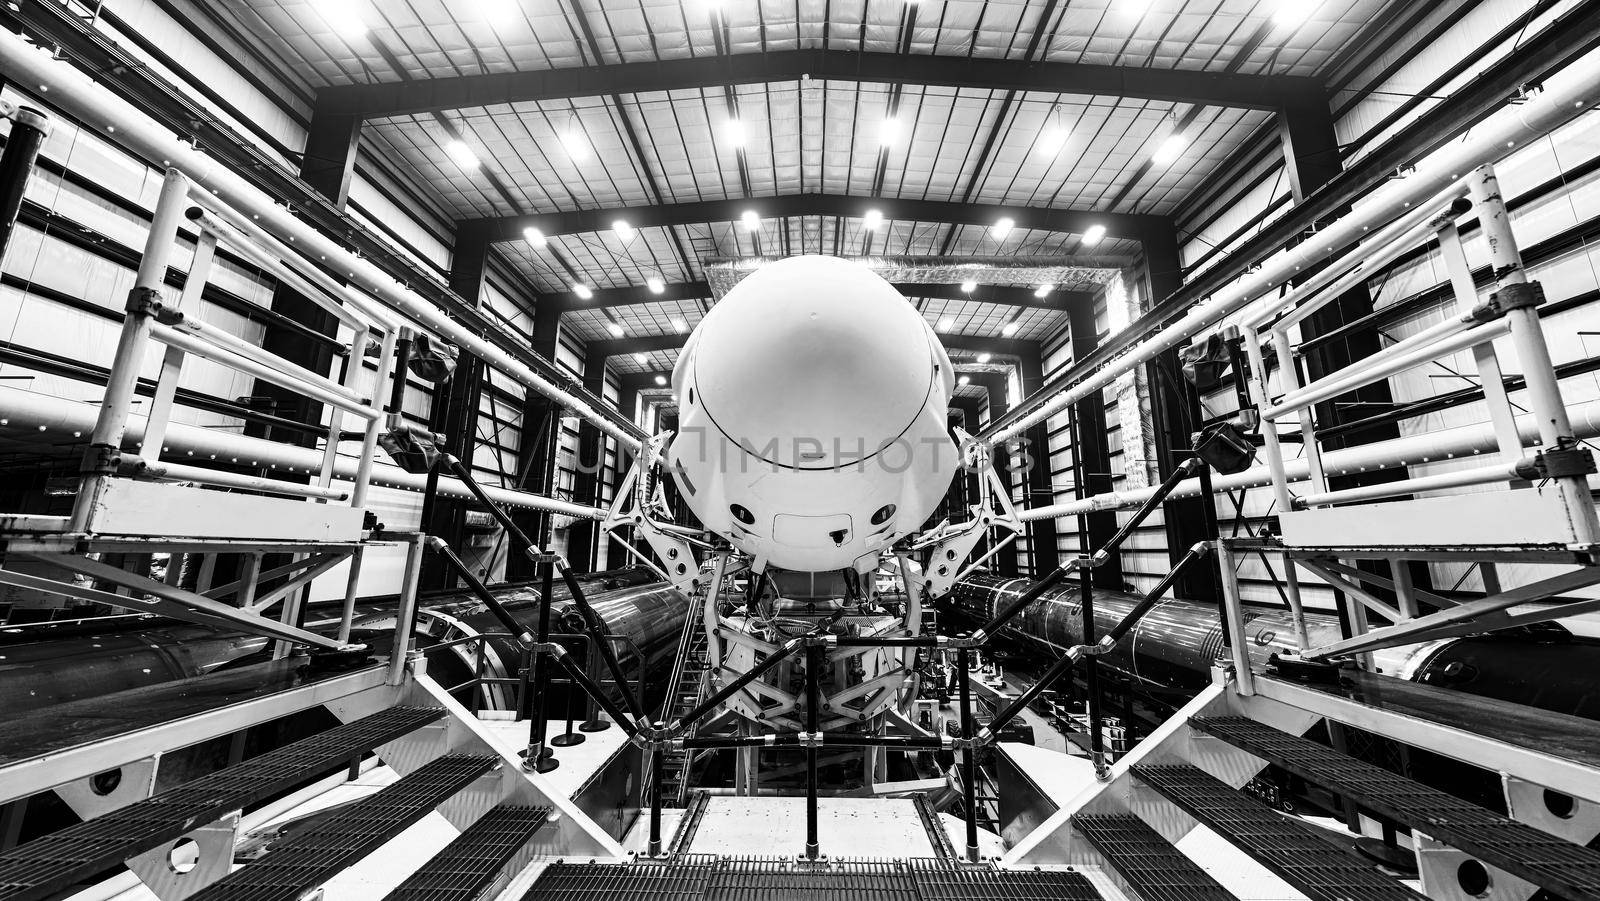 Space launch preparation. Spaceship atop the rocket, inside the hangar, just before rollout to the launchpad. Elements of this image furnished by NASA by EvgeniyQW